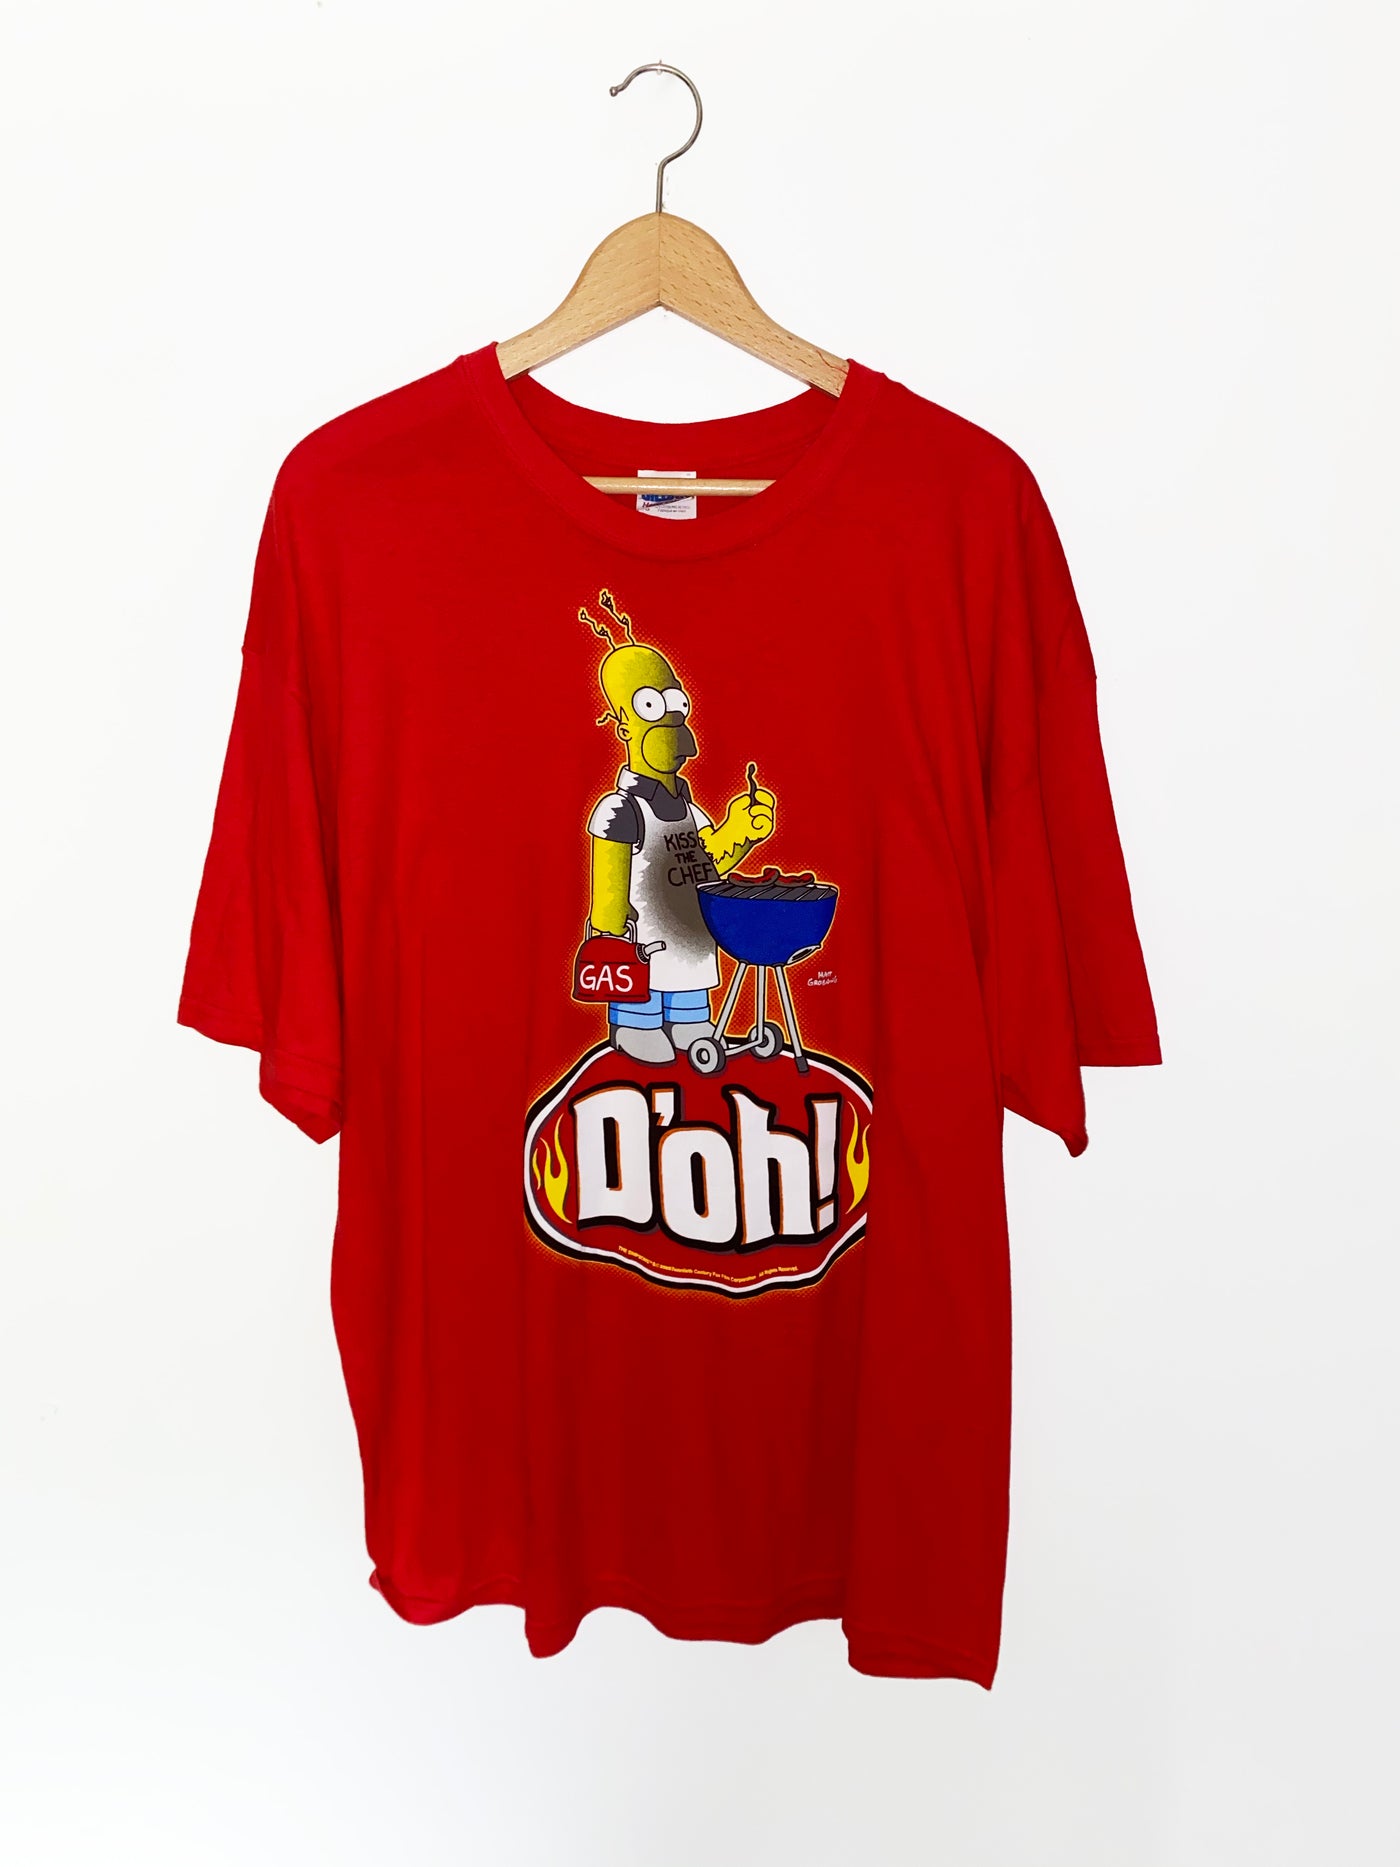 2009 The Simpson’s “D’oh!” Promo T-Shirt